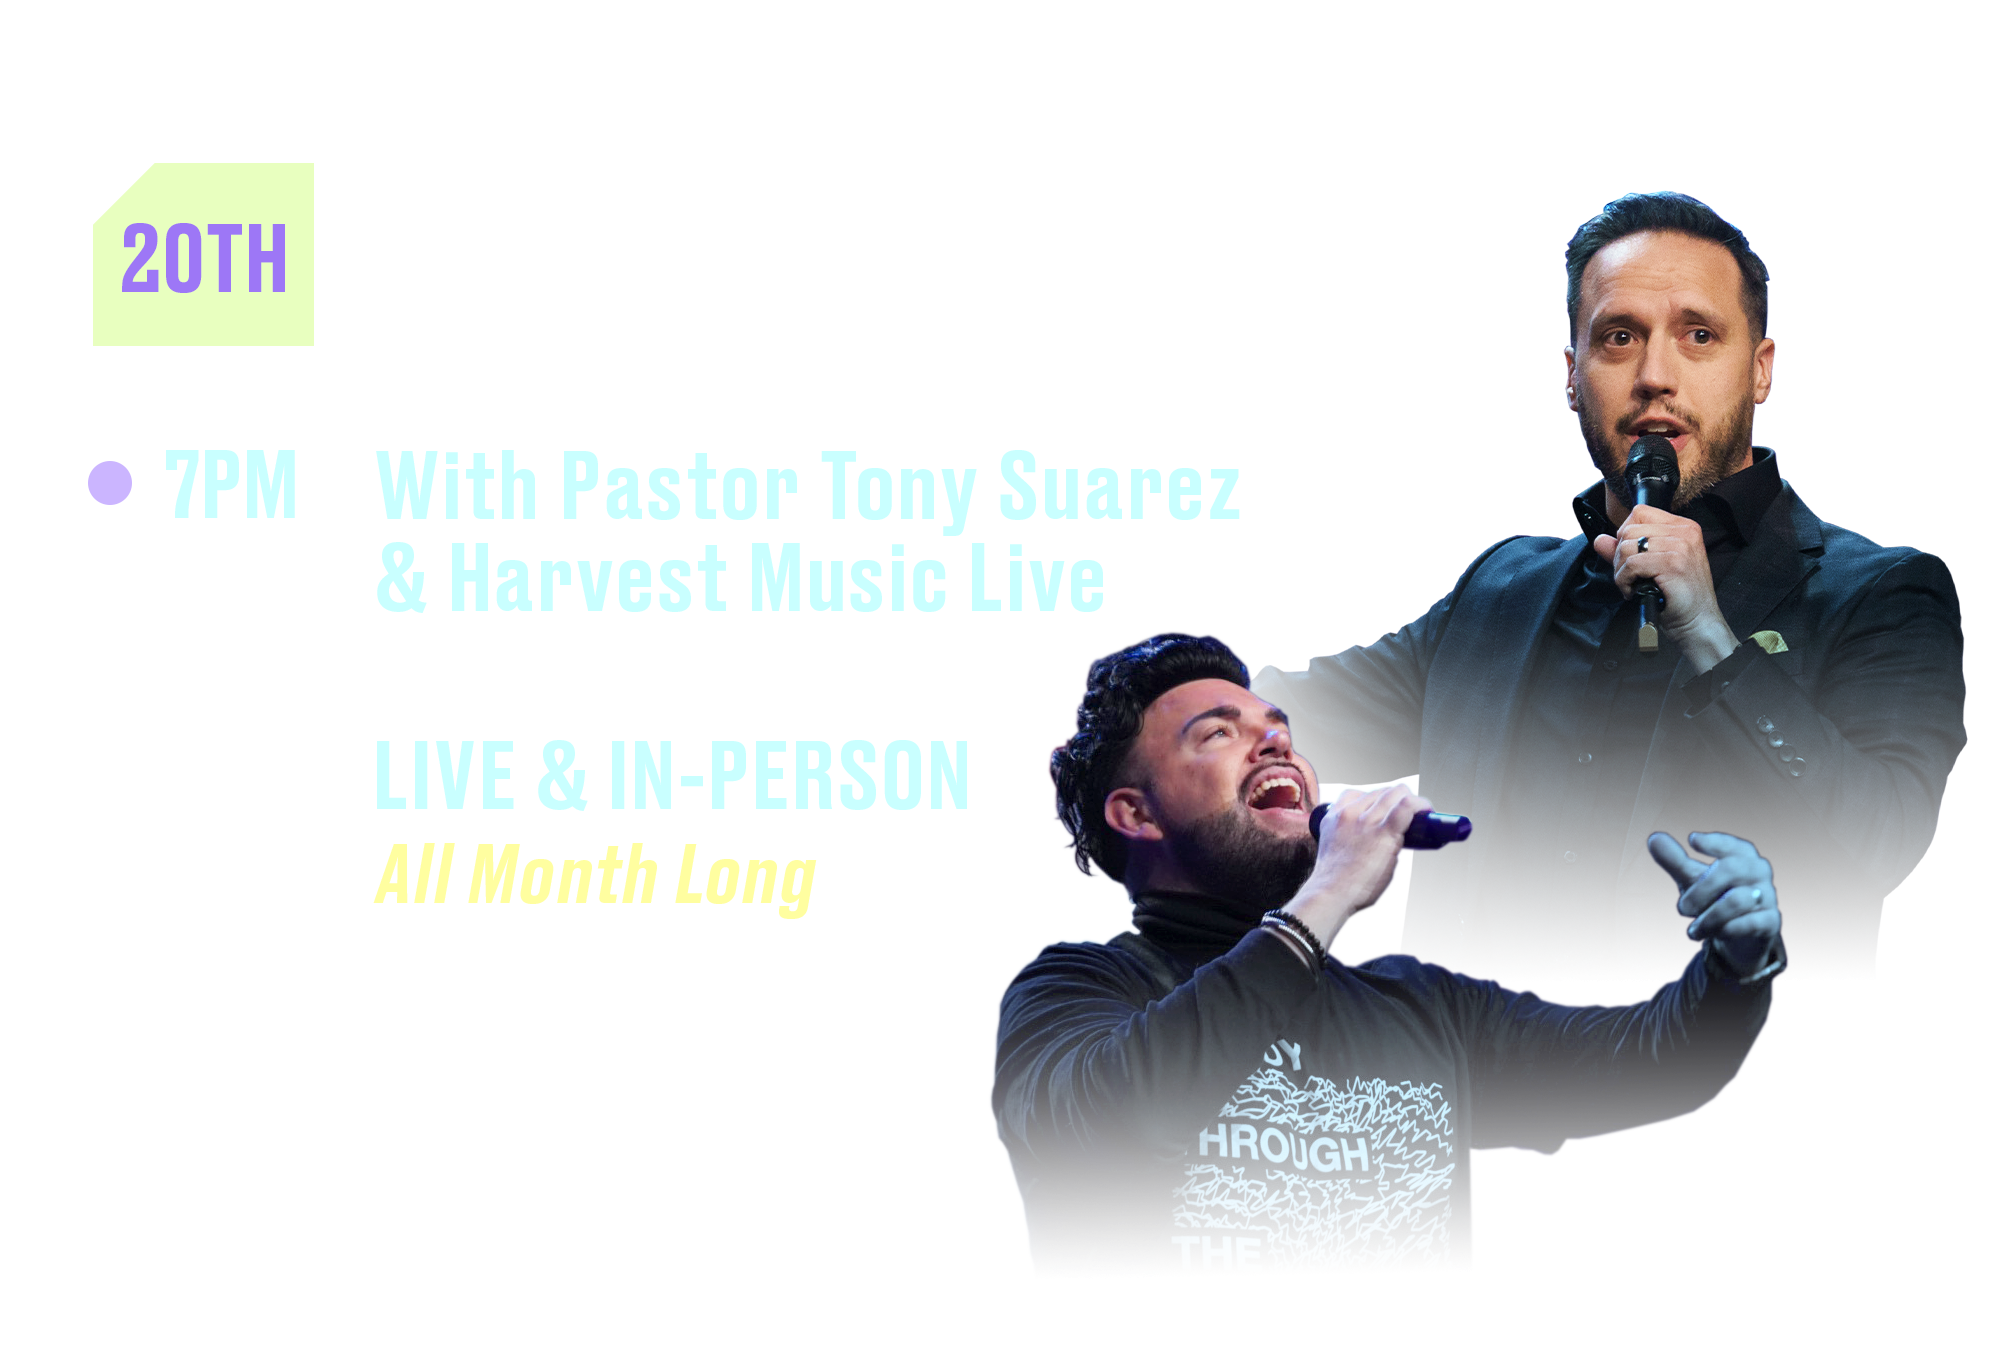 20th Outpouring Wednesdays 7PM With Pastor Tony Suarez and HArvest Music Live. Live and In-Person All Month Long